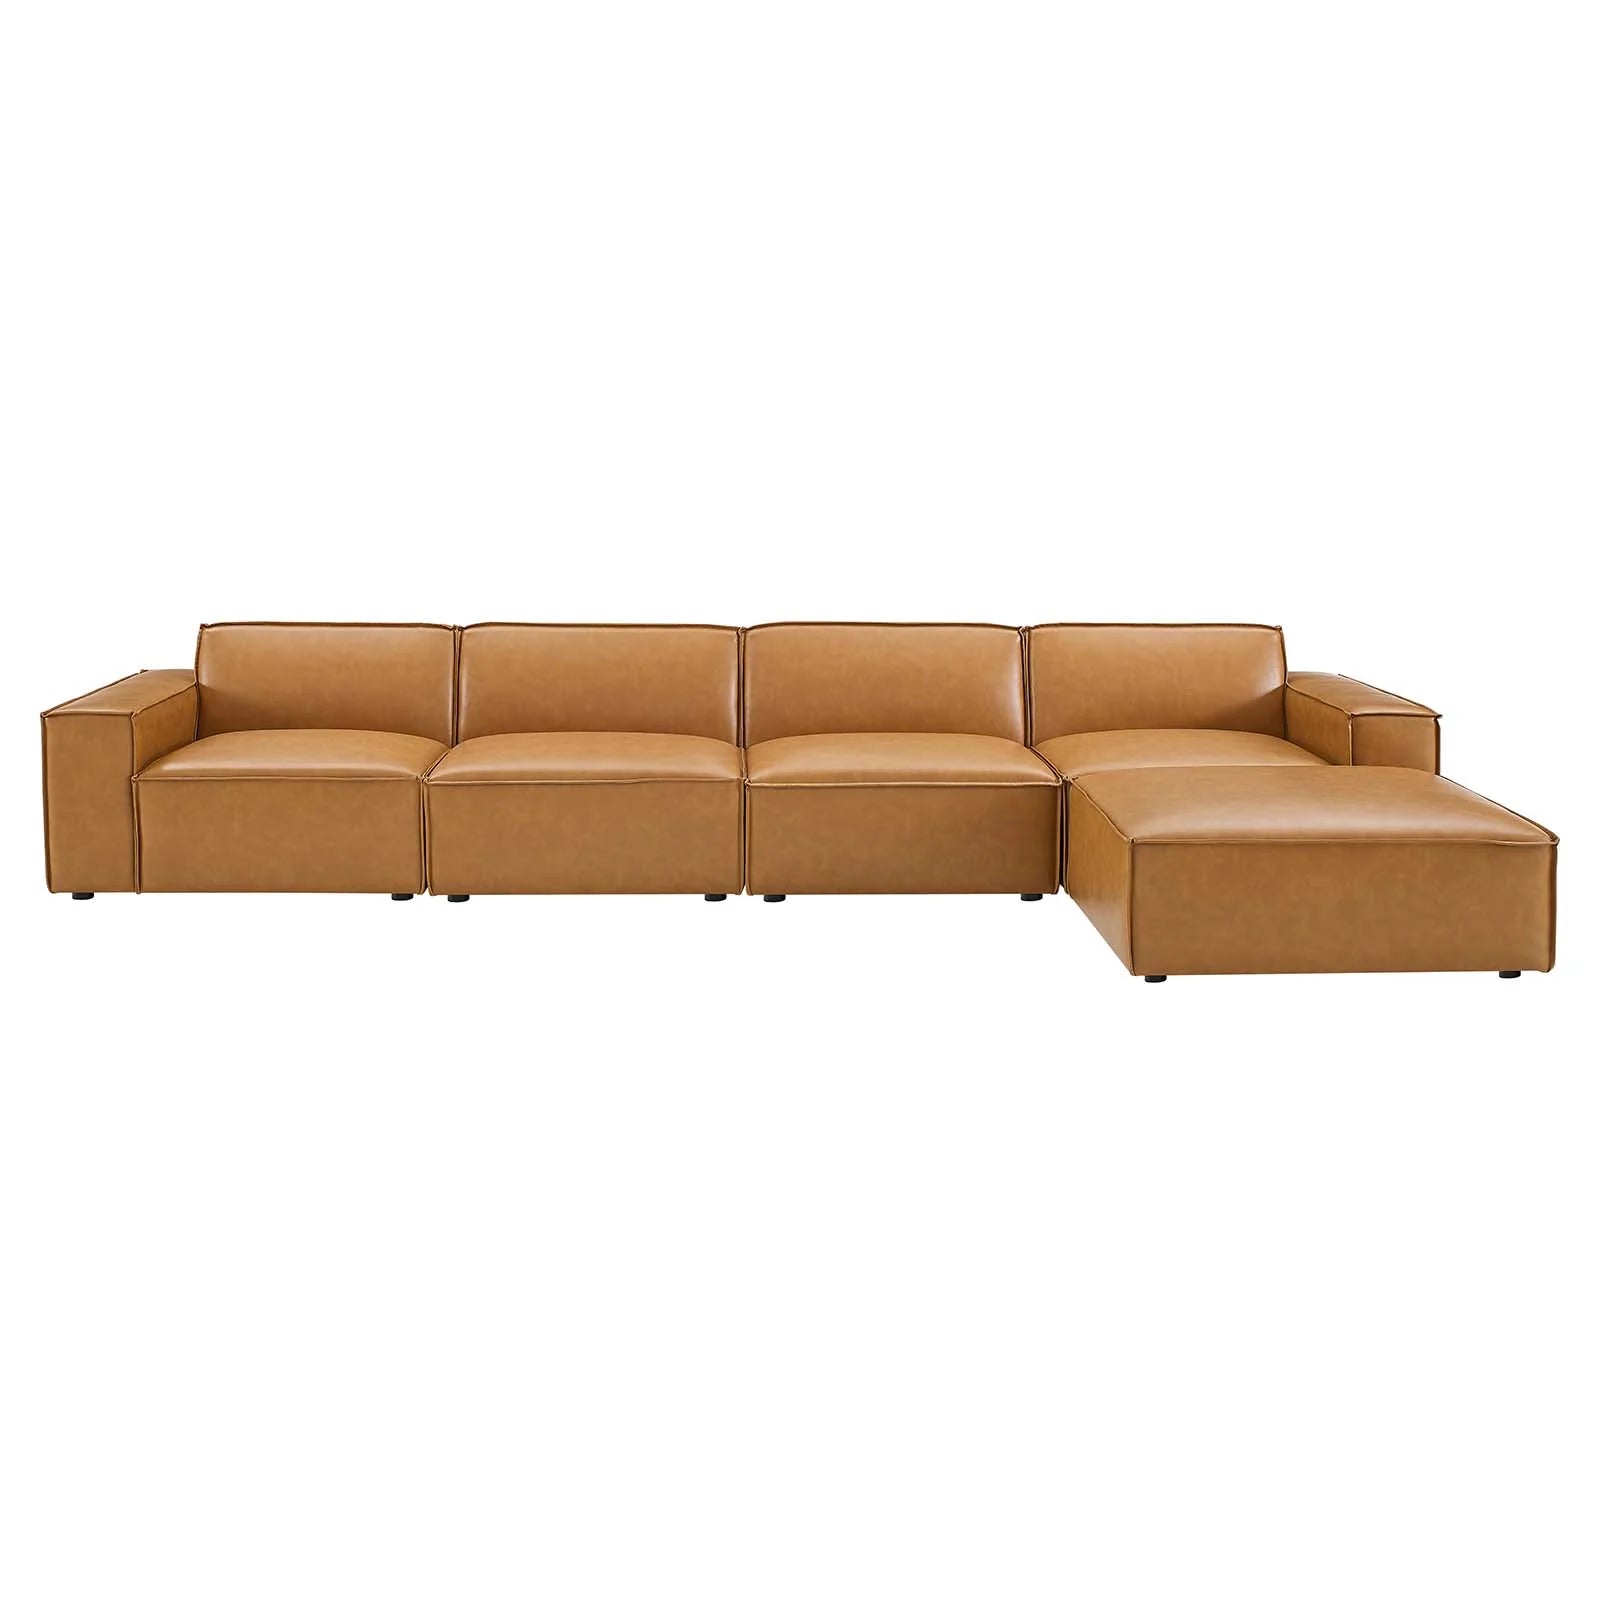 BREEZE 5 PIECE EXTENDED SECTIONAL - TAN VEGAN LEATHER